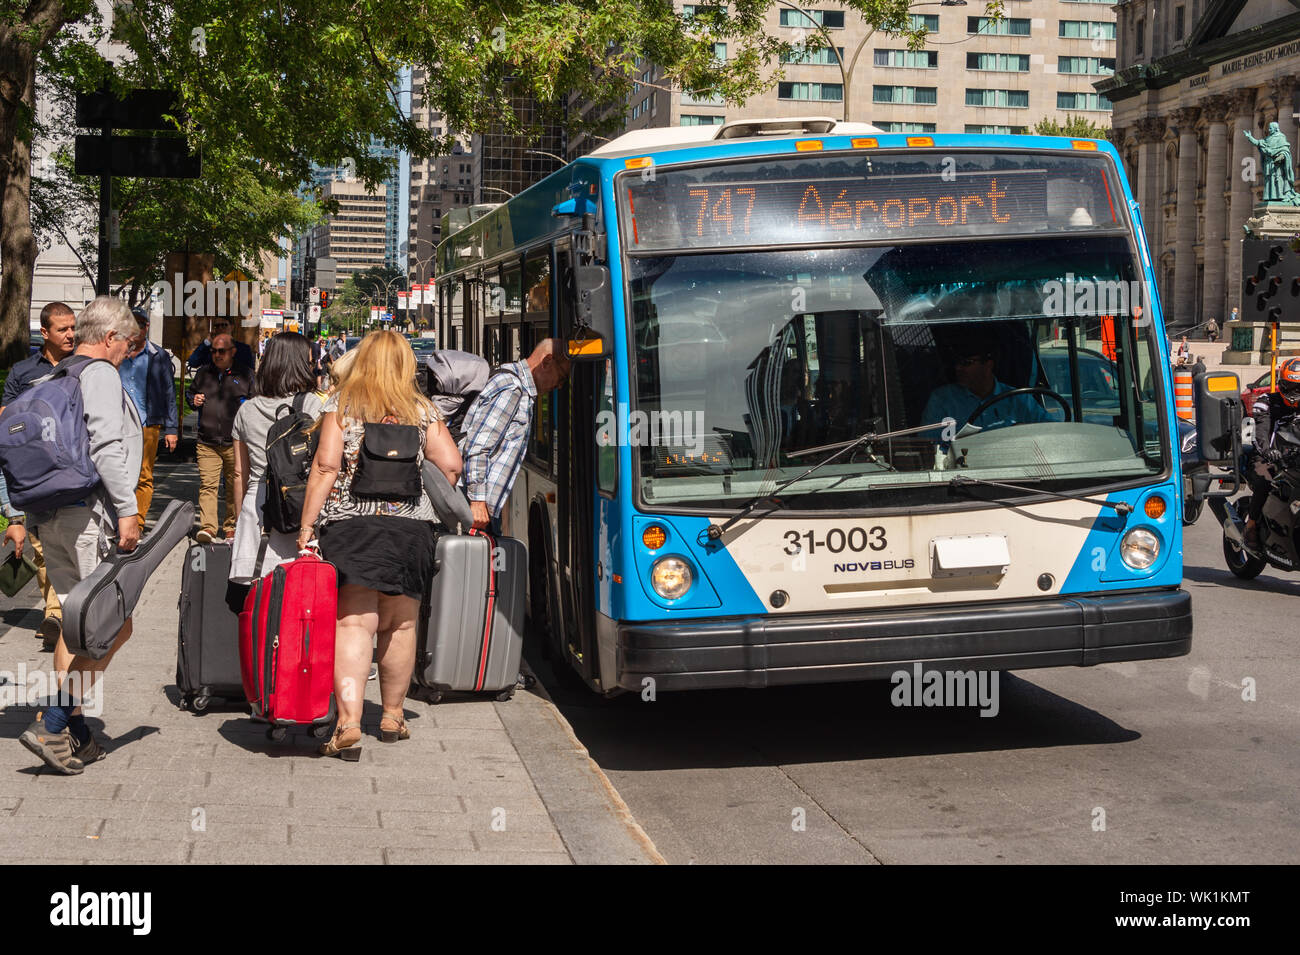 Montreal, CA - 3 September 2019: People boarding the 747 bus going to Montreal Trudeau Airport on René Lévesque Bld. Stock Photo